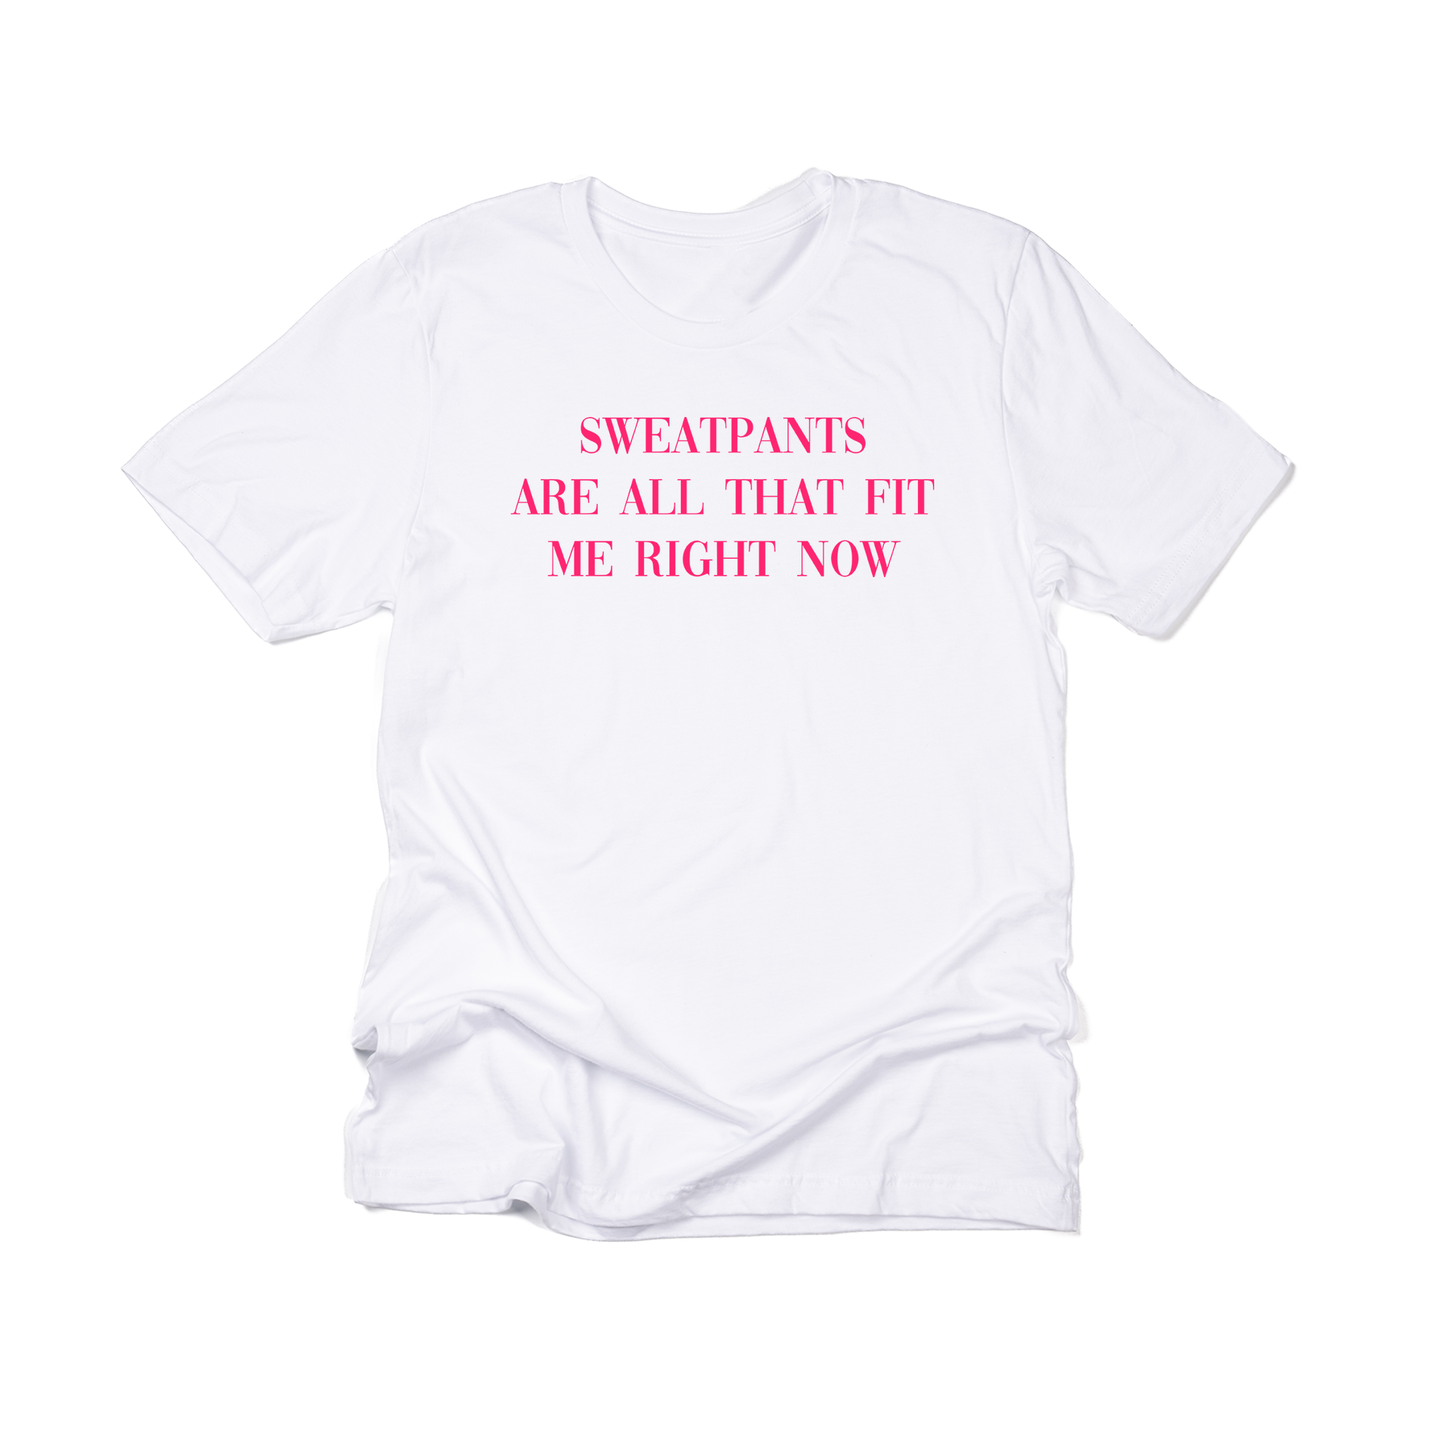 Sweatpants are all that fit me right now (Hot Pink) - Tee (White)